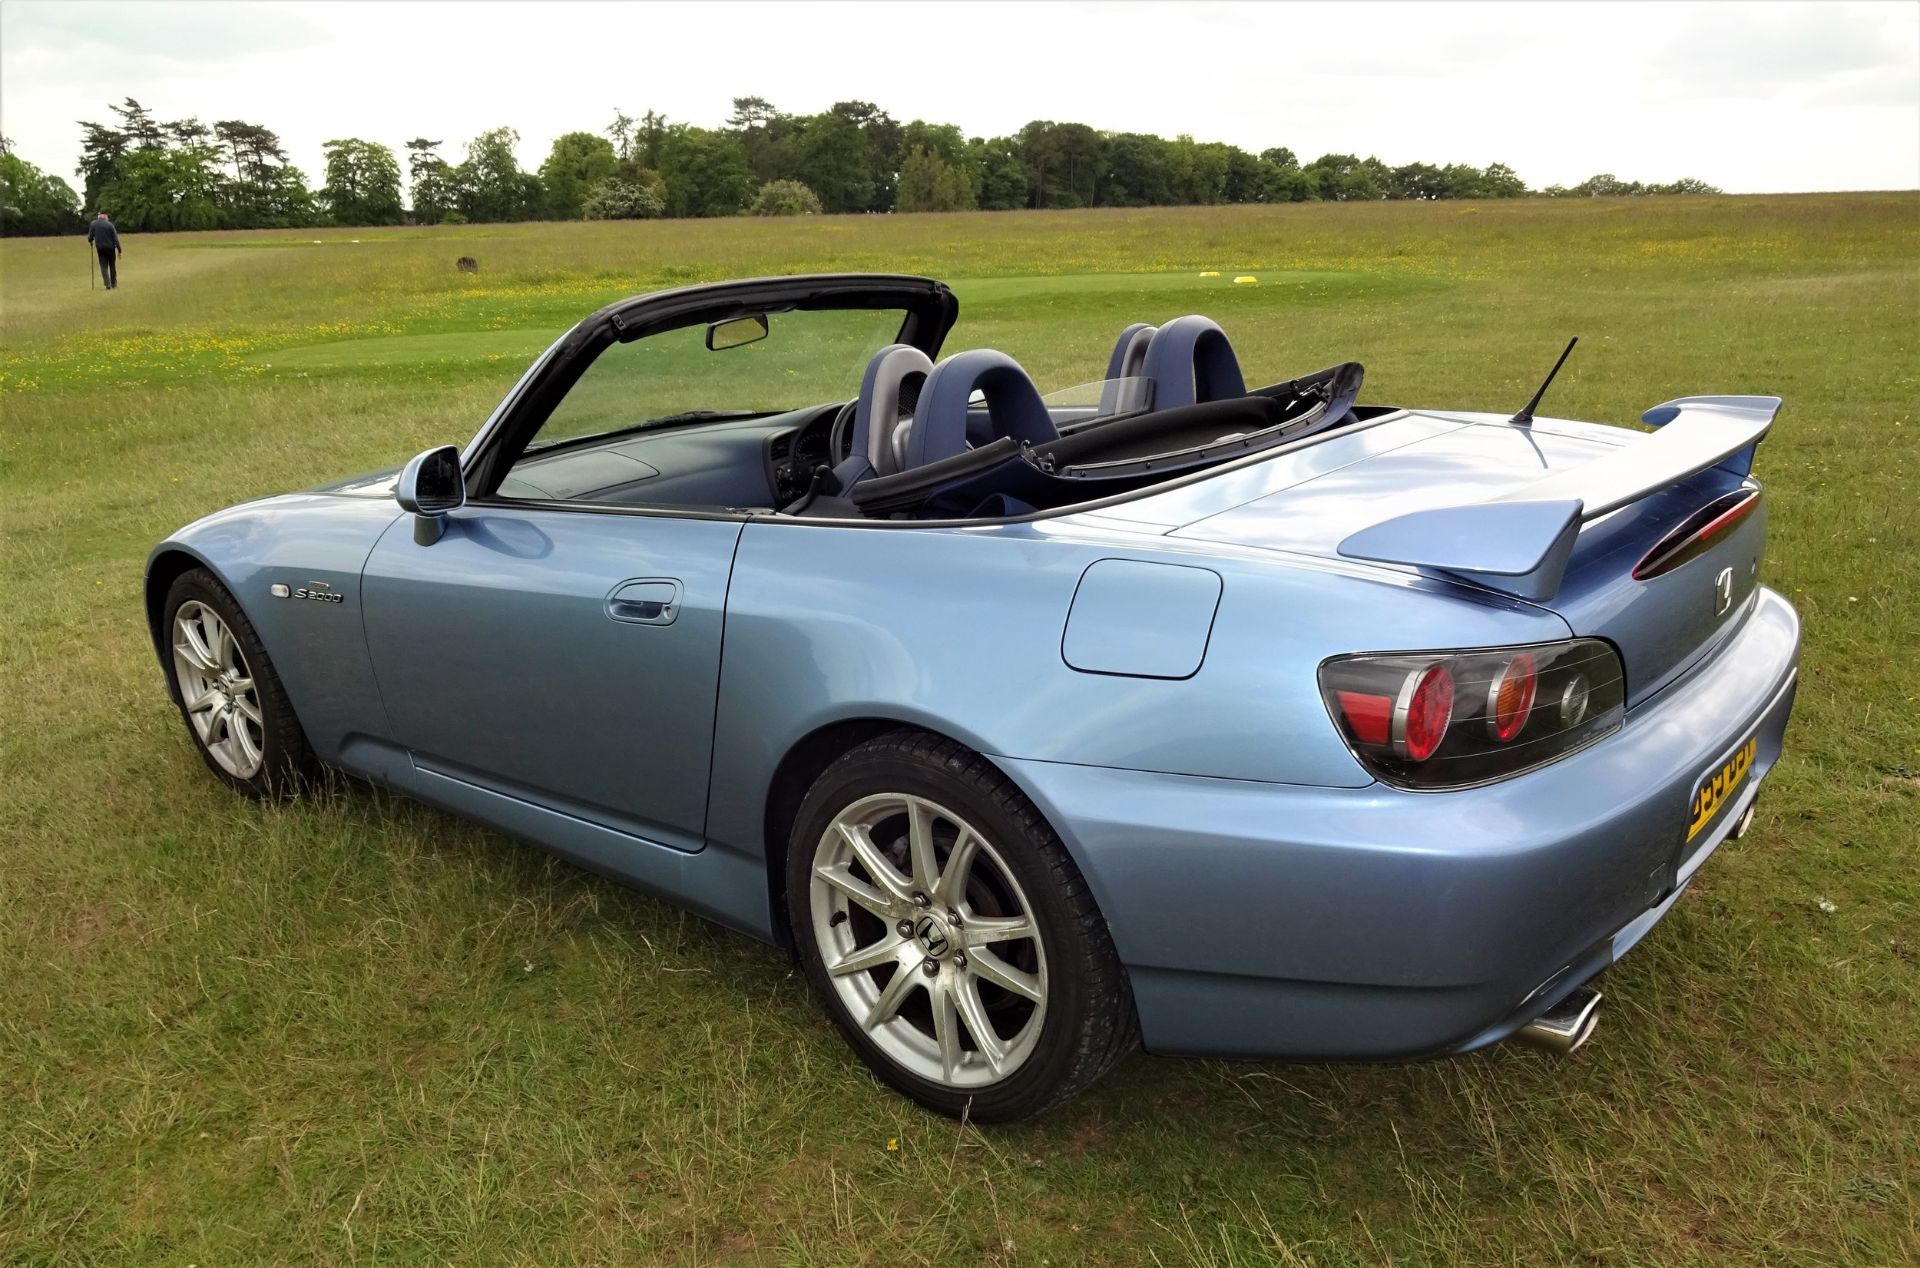 2005 HONDA S2000 Registration Number: RJ55 BSY Chassis Number: JHMPA11305S202028 - In current - Bild 5 aus 15